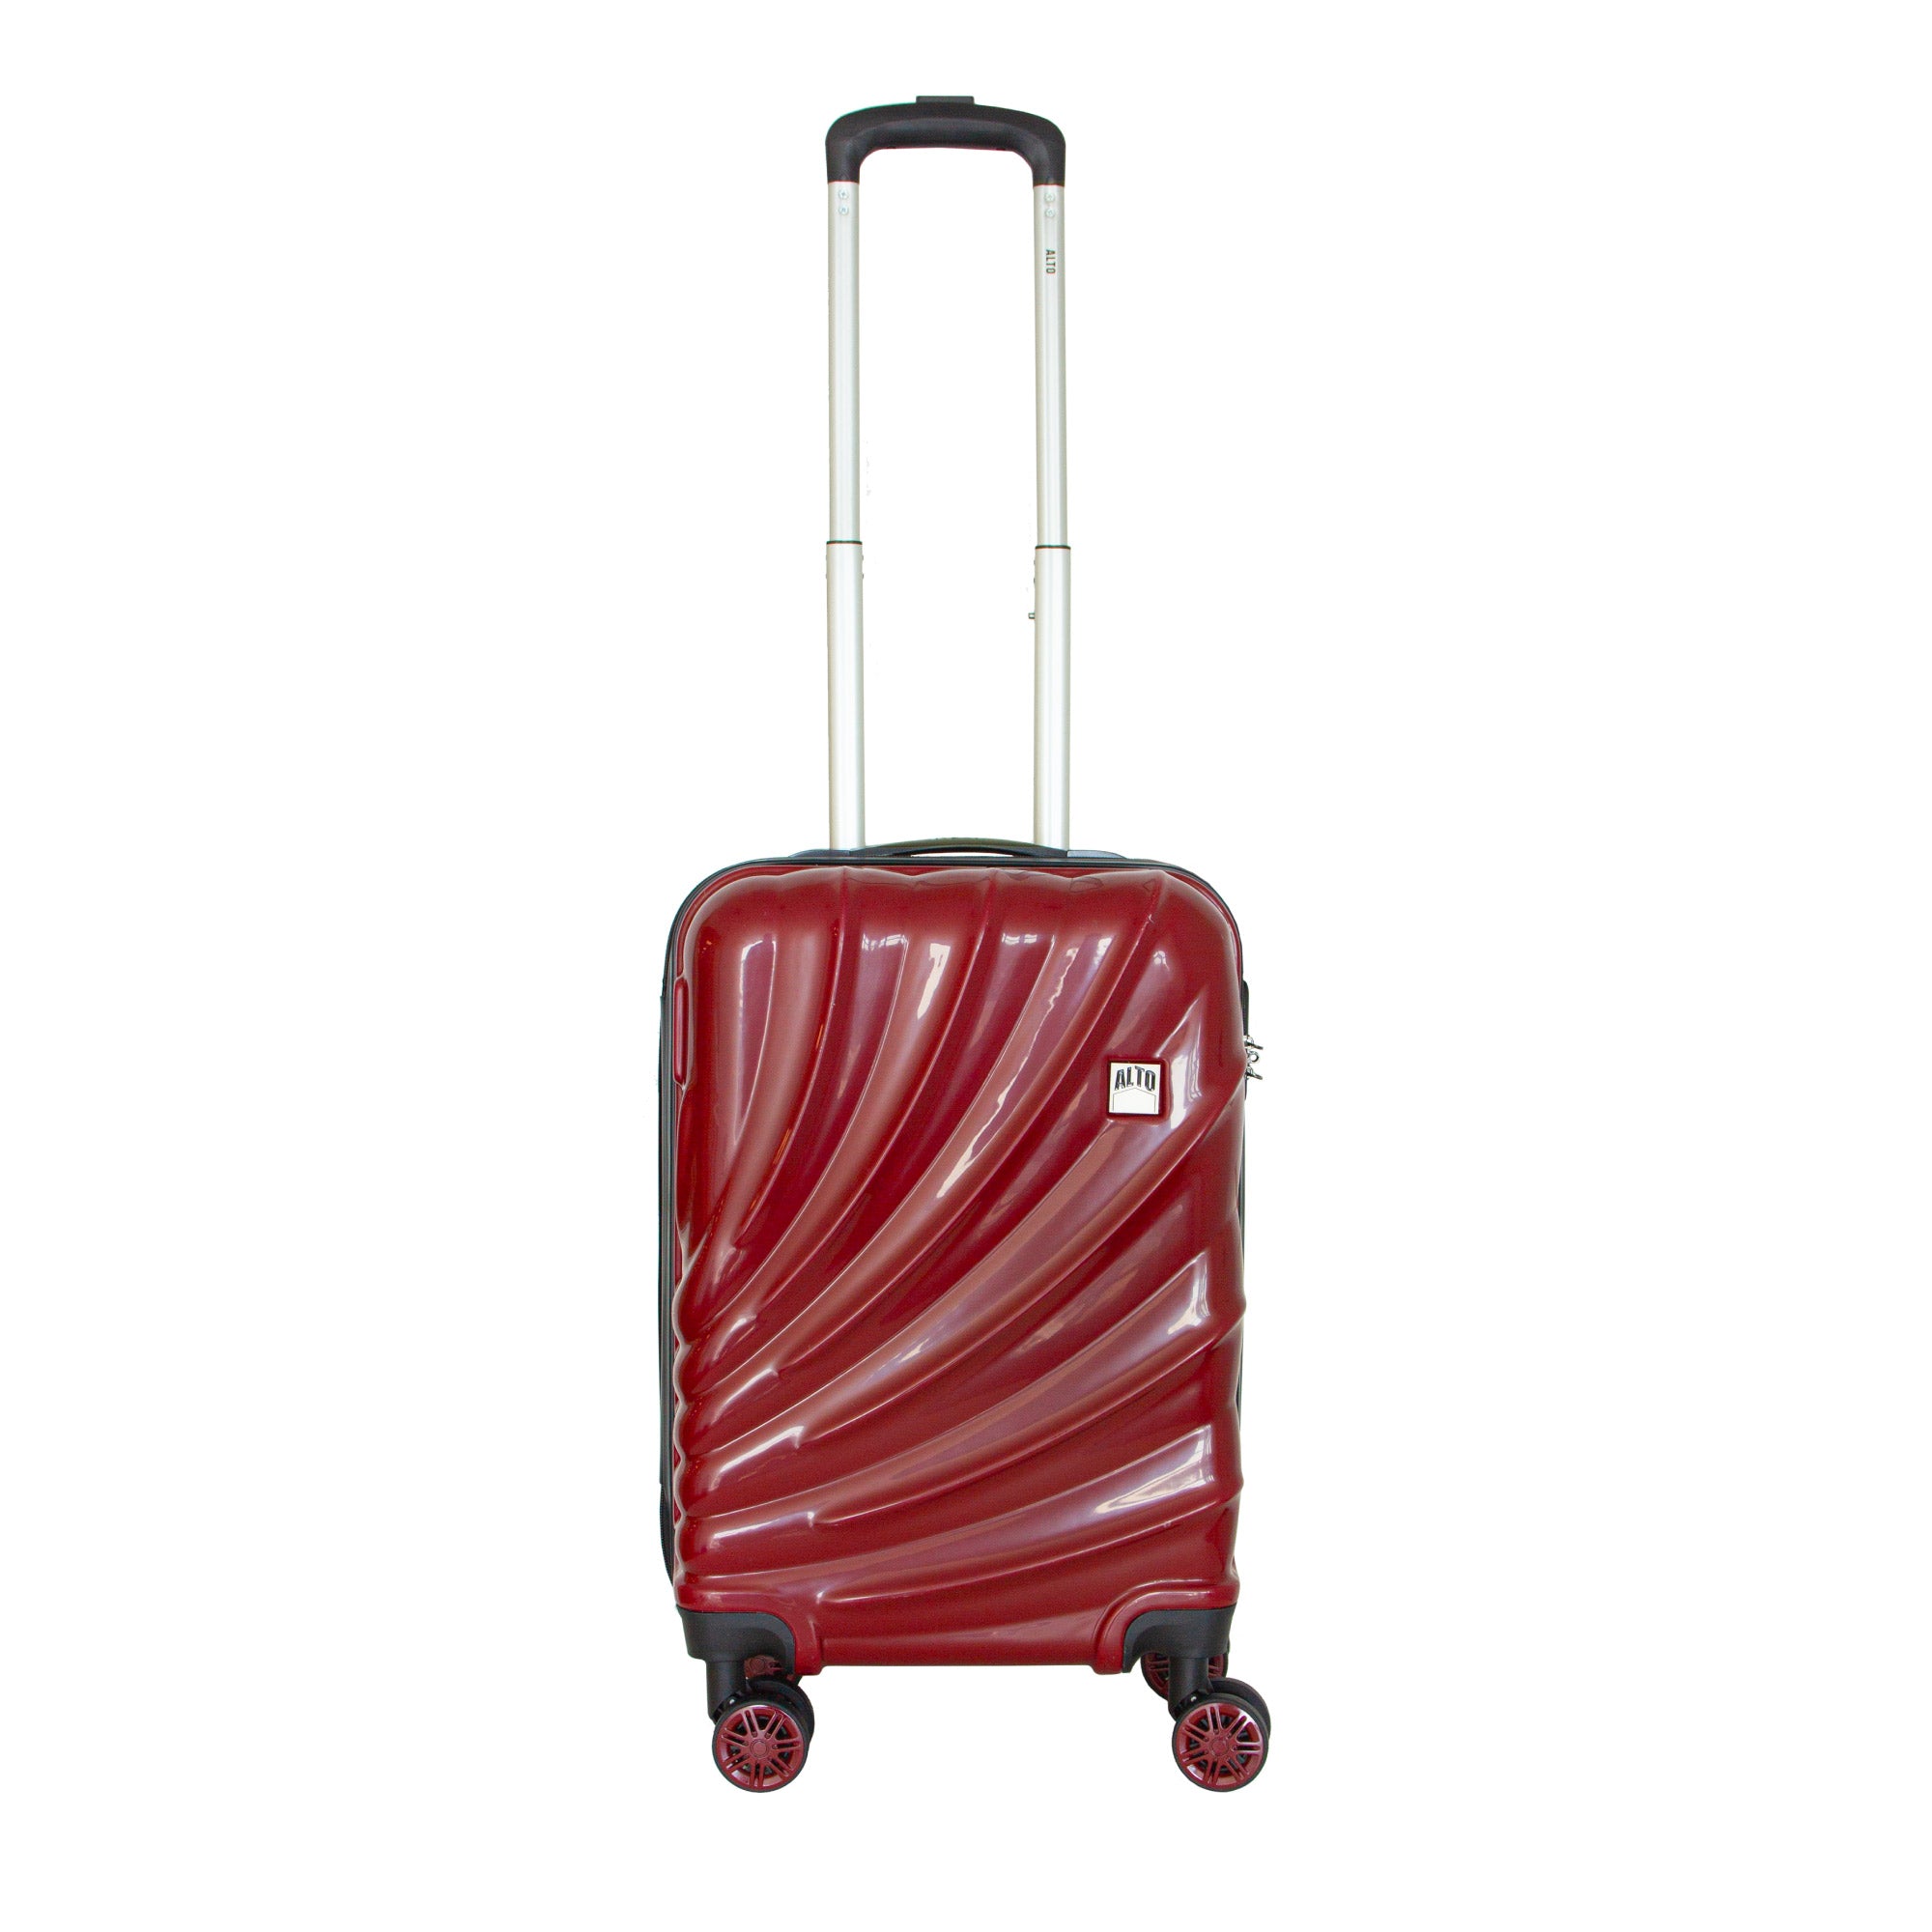 Alto Global ABS Luggage Suitcase - Red - Cabin  | TJ Hughes